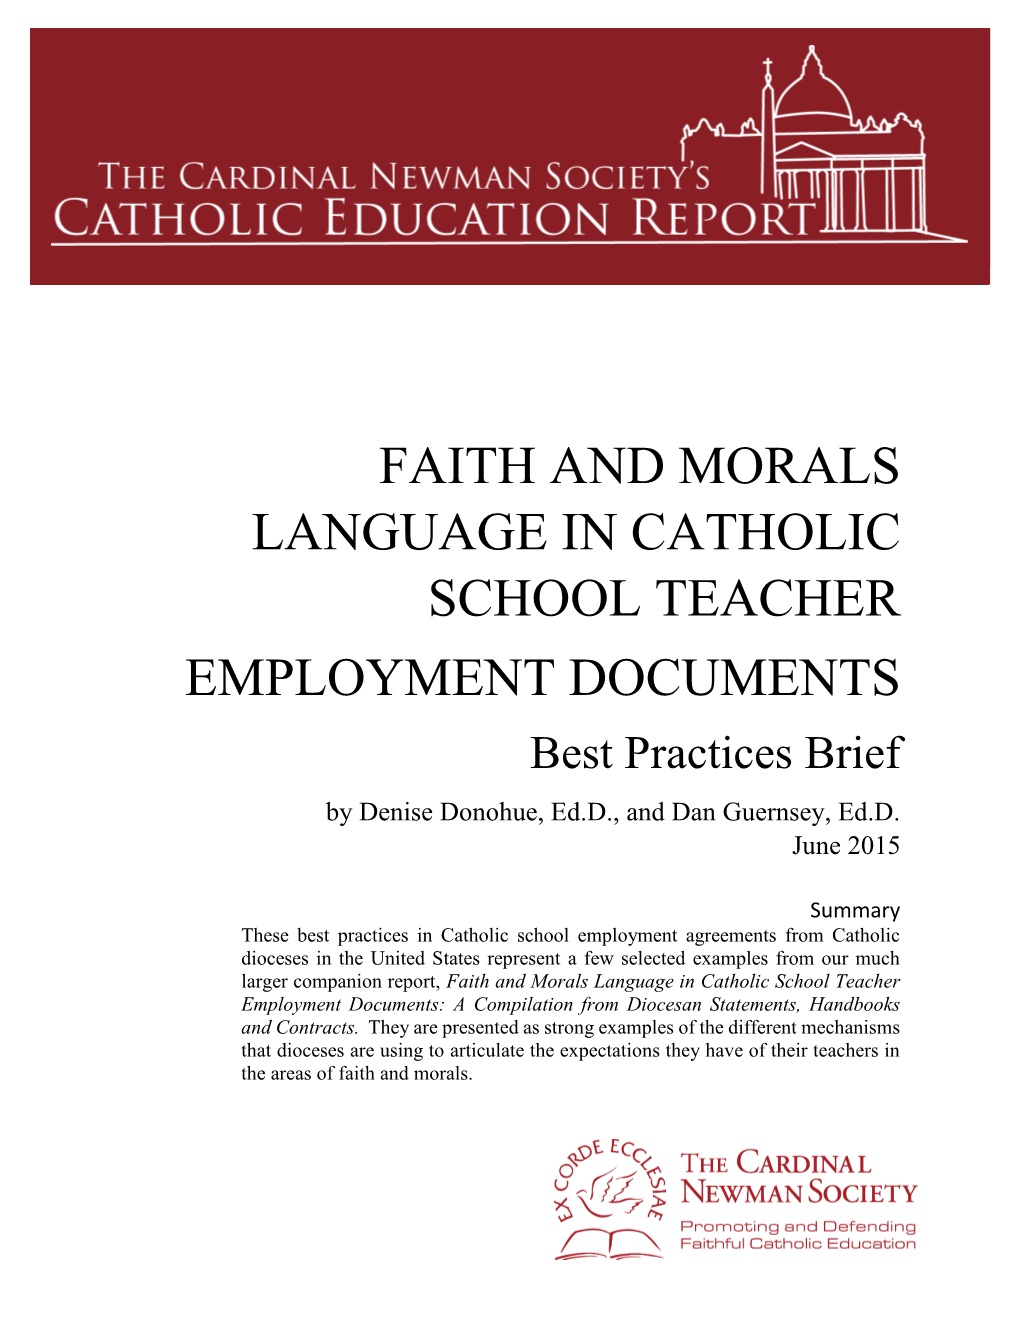 FAITH and MORALS LANGUAGE in CATHOLIC SCHOOL TEACHER EMPLOYMENT DOCUMENTS Best Practices Brief by Denise Donohue, Ed.D., and Dan Guernsey, Ed.D